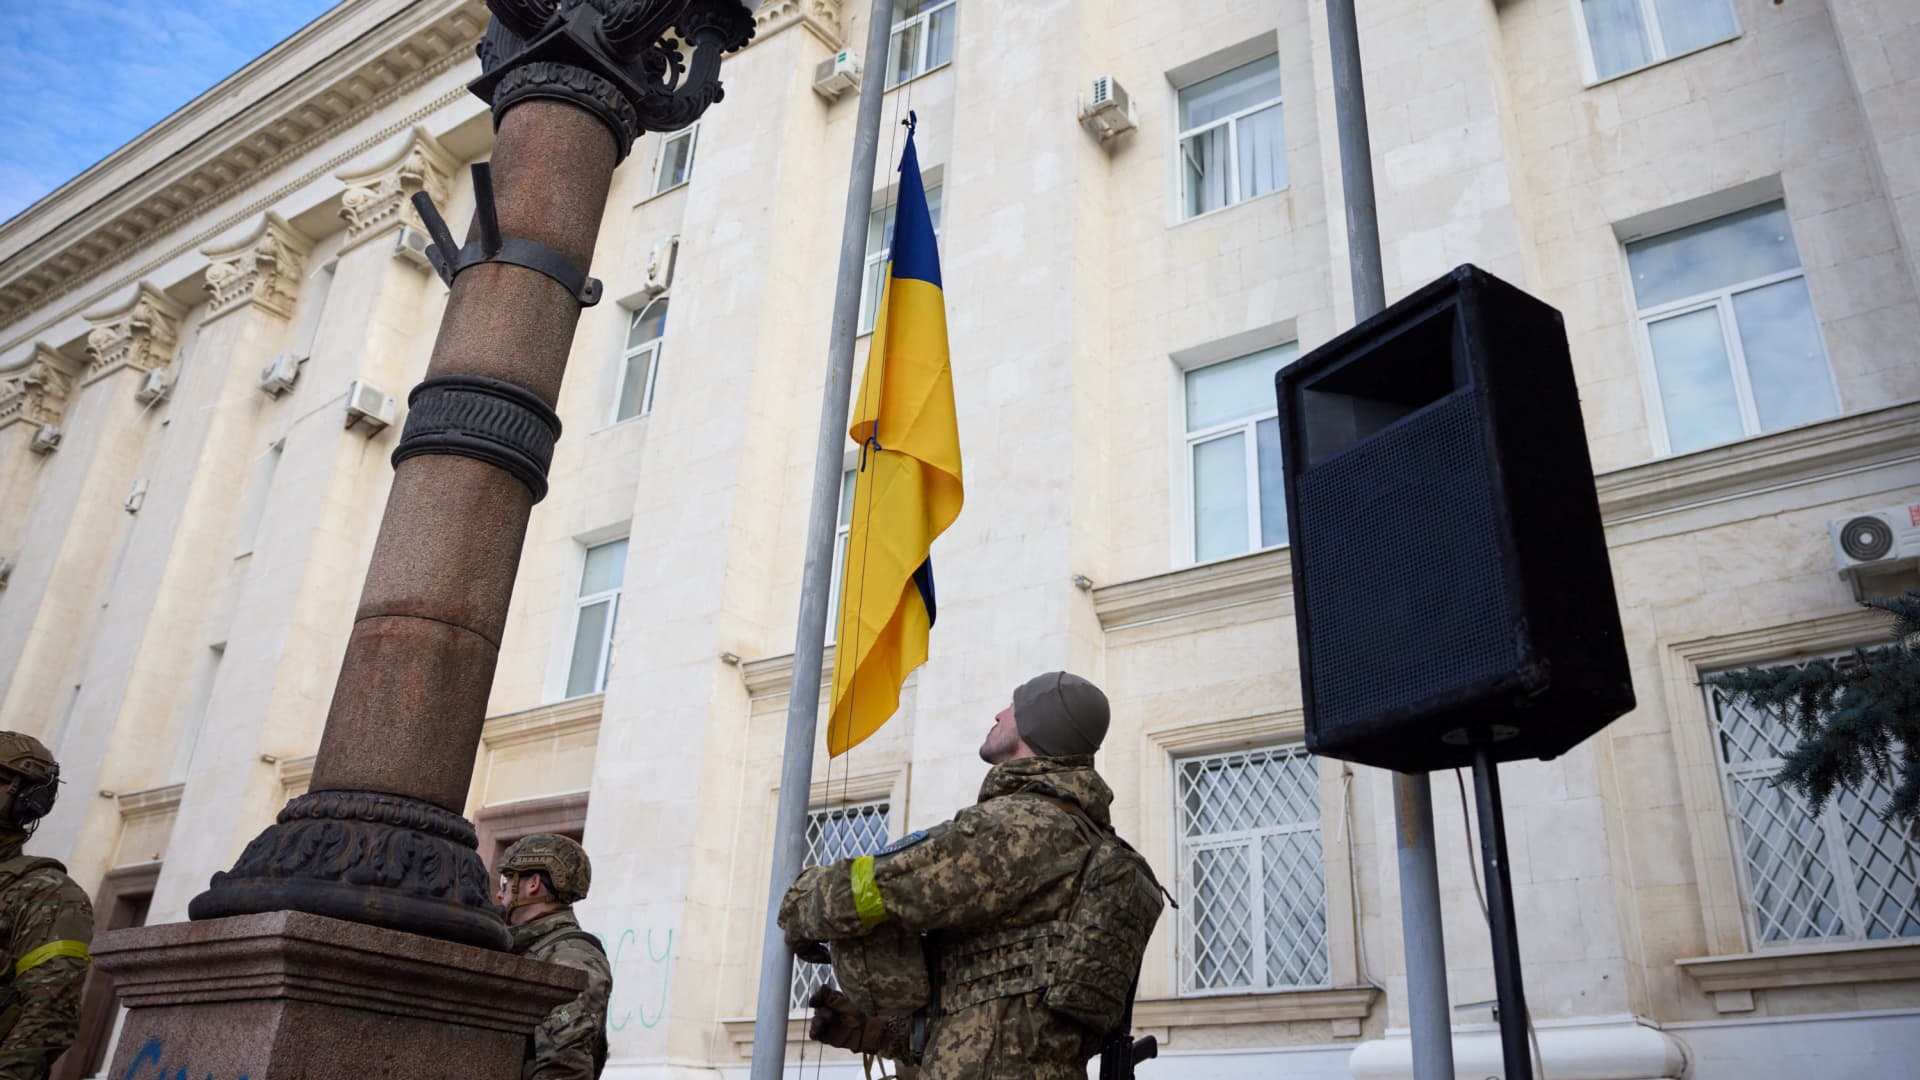 Ukrainian serviceman takes part in a national flag raising ceremony in Kherson, recently recaptured by Ukrainian Armed Forces, Ukraine November 14, 2022.